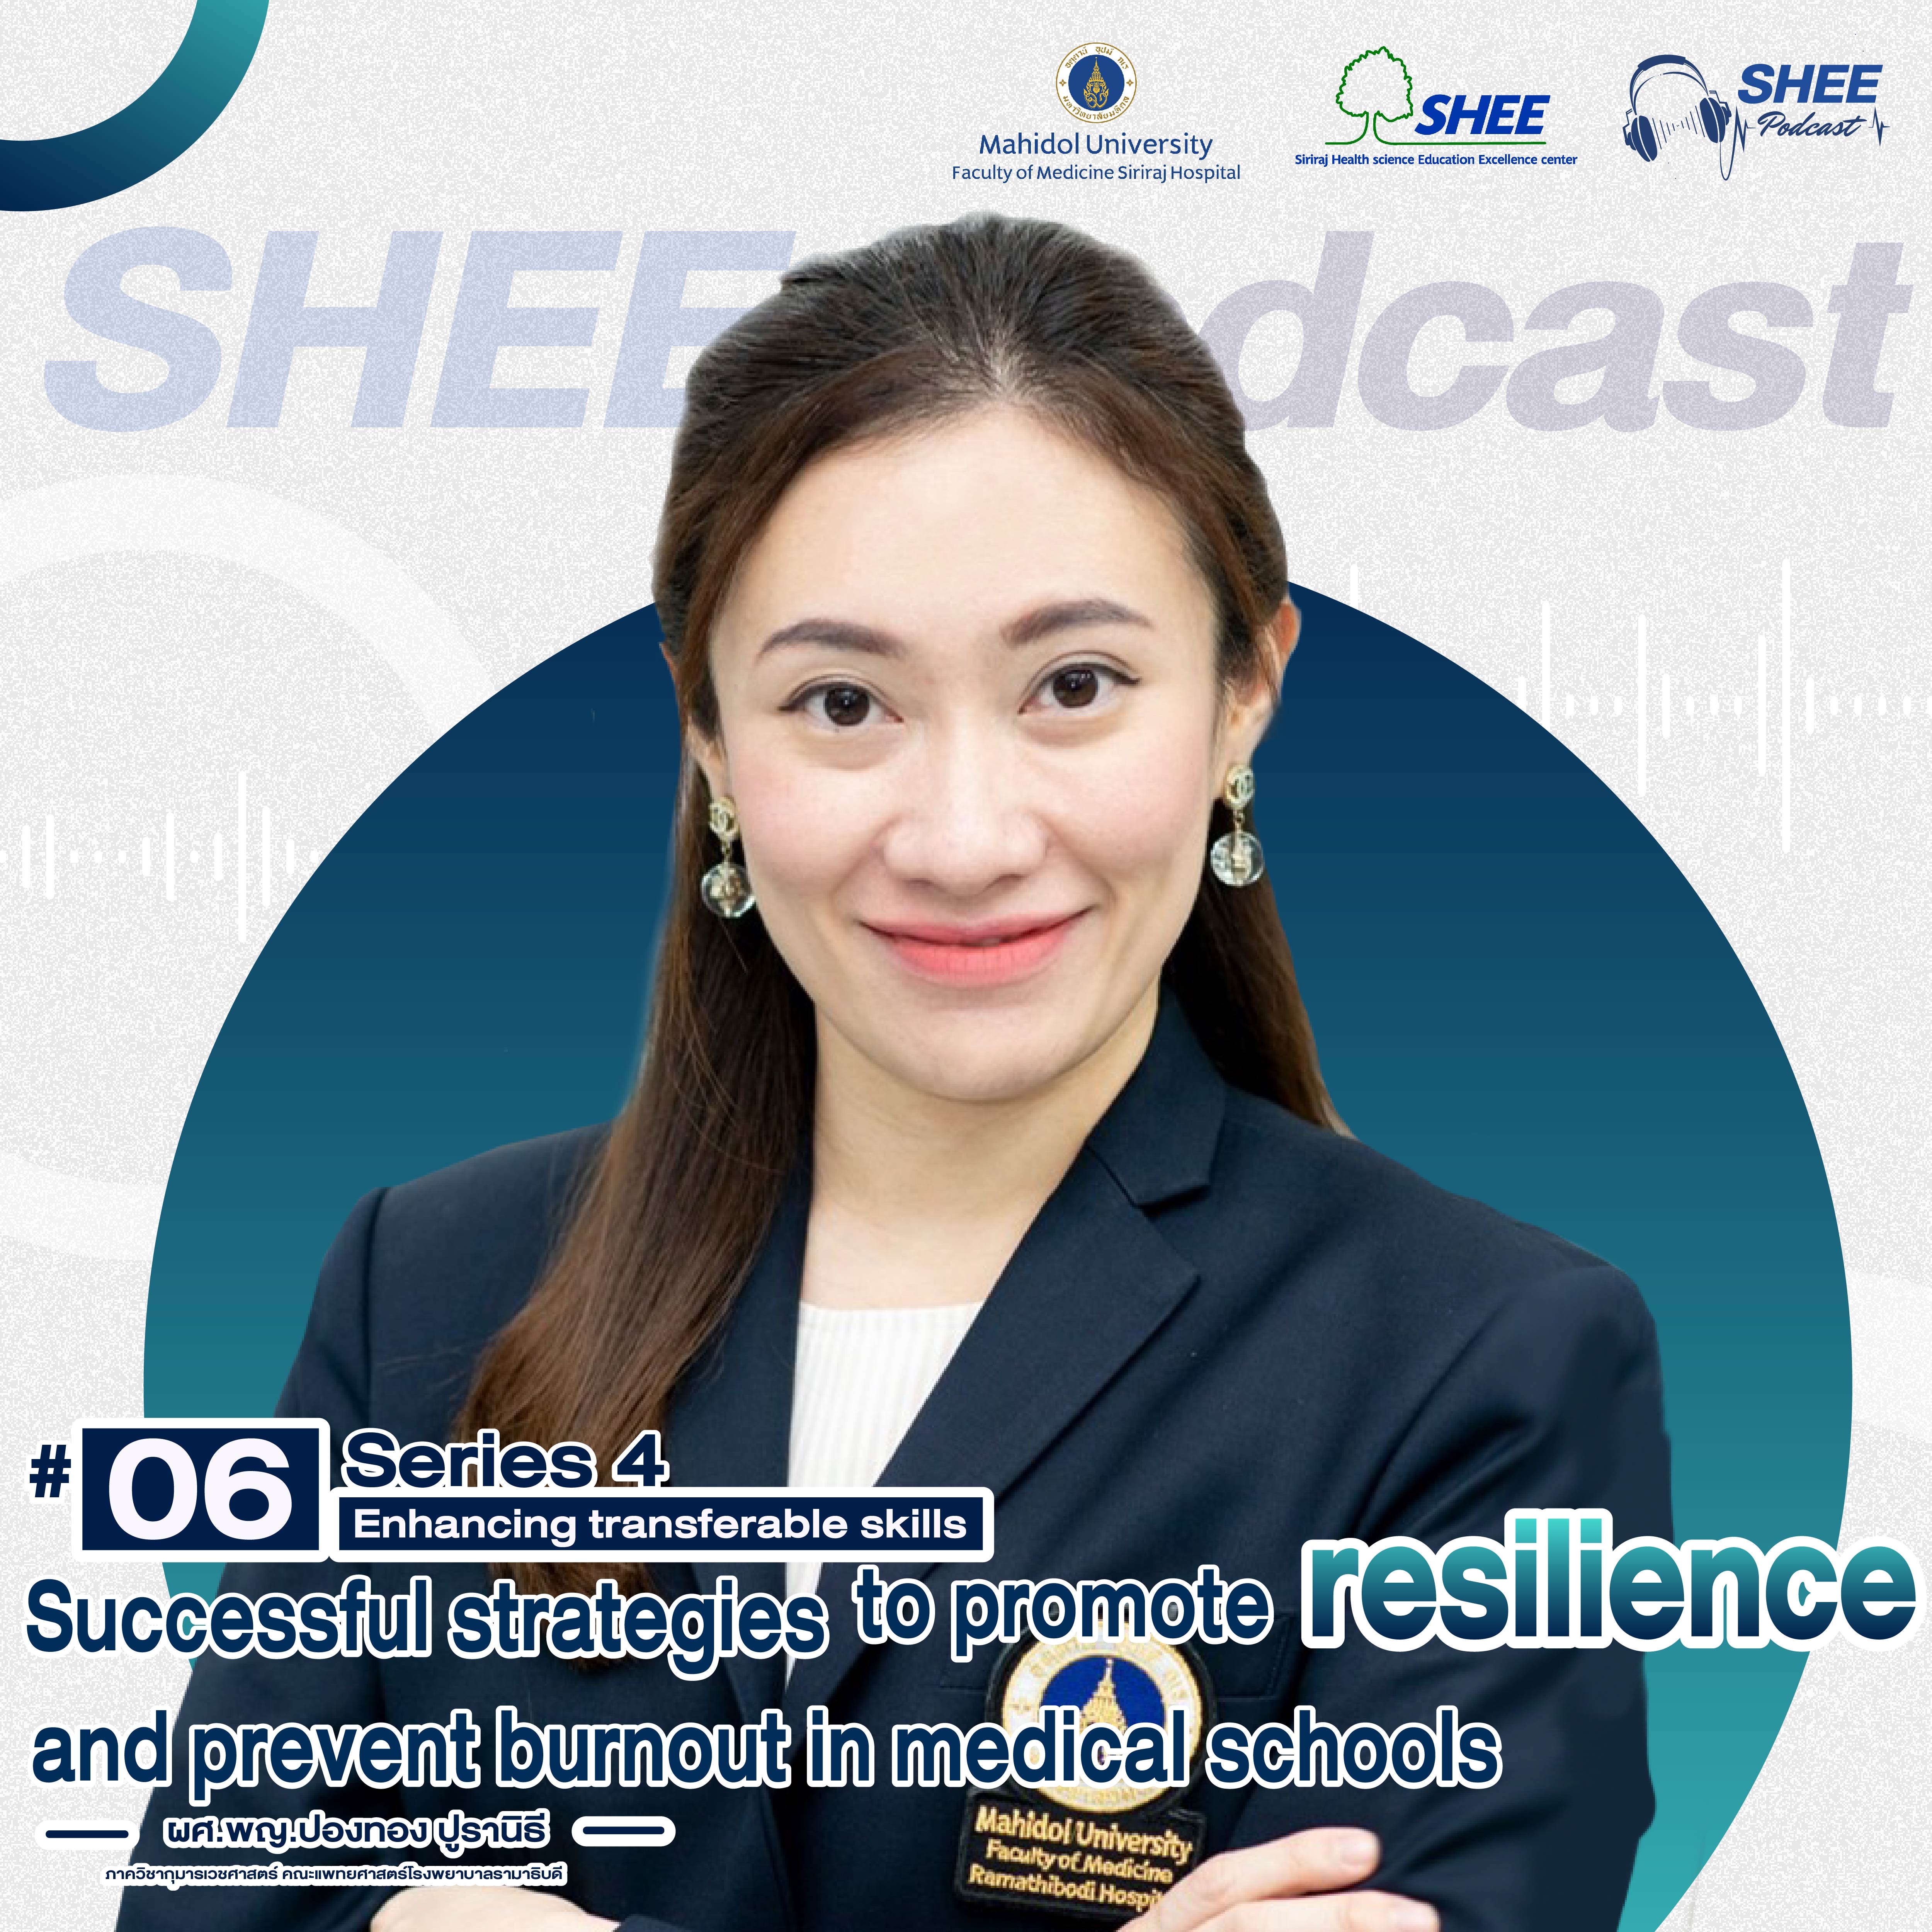 EP06 Successful strategies to promote resilience and prevent burnout in medical schools